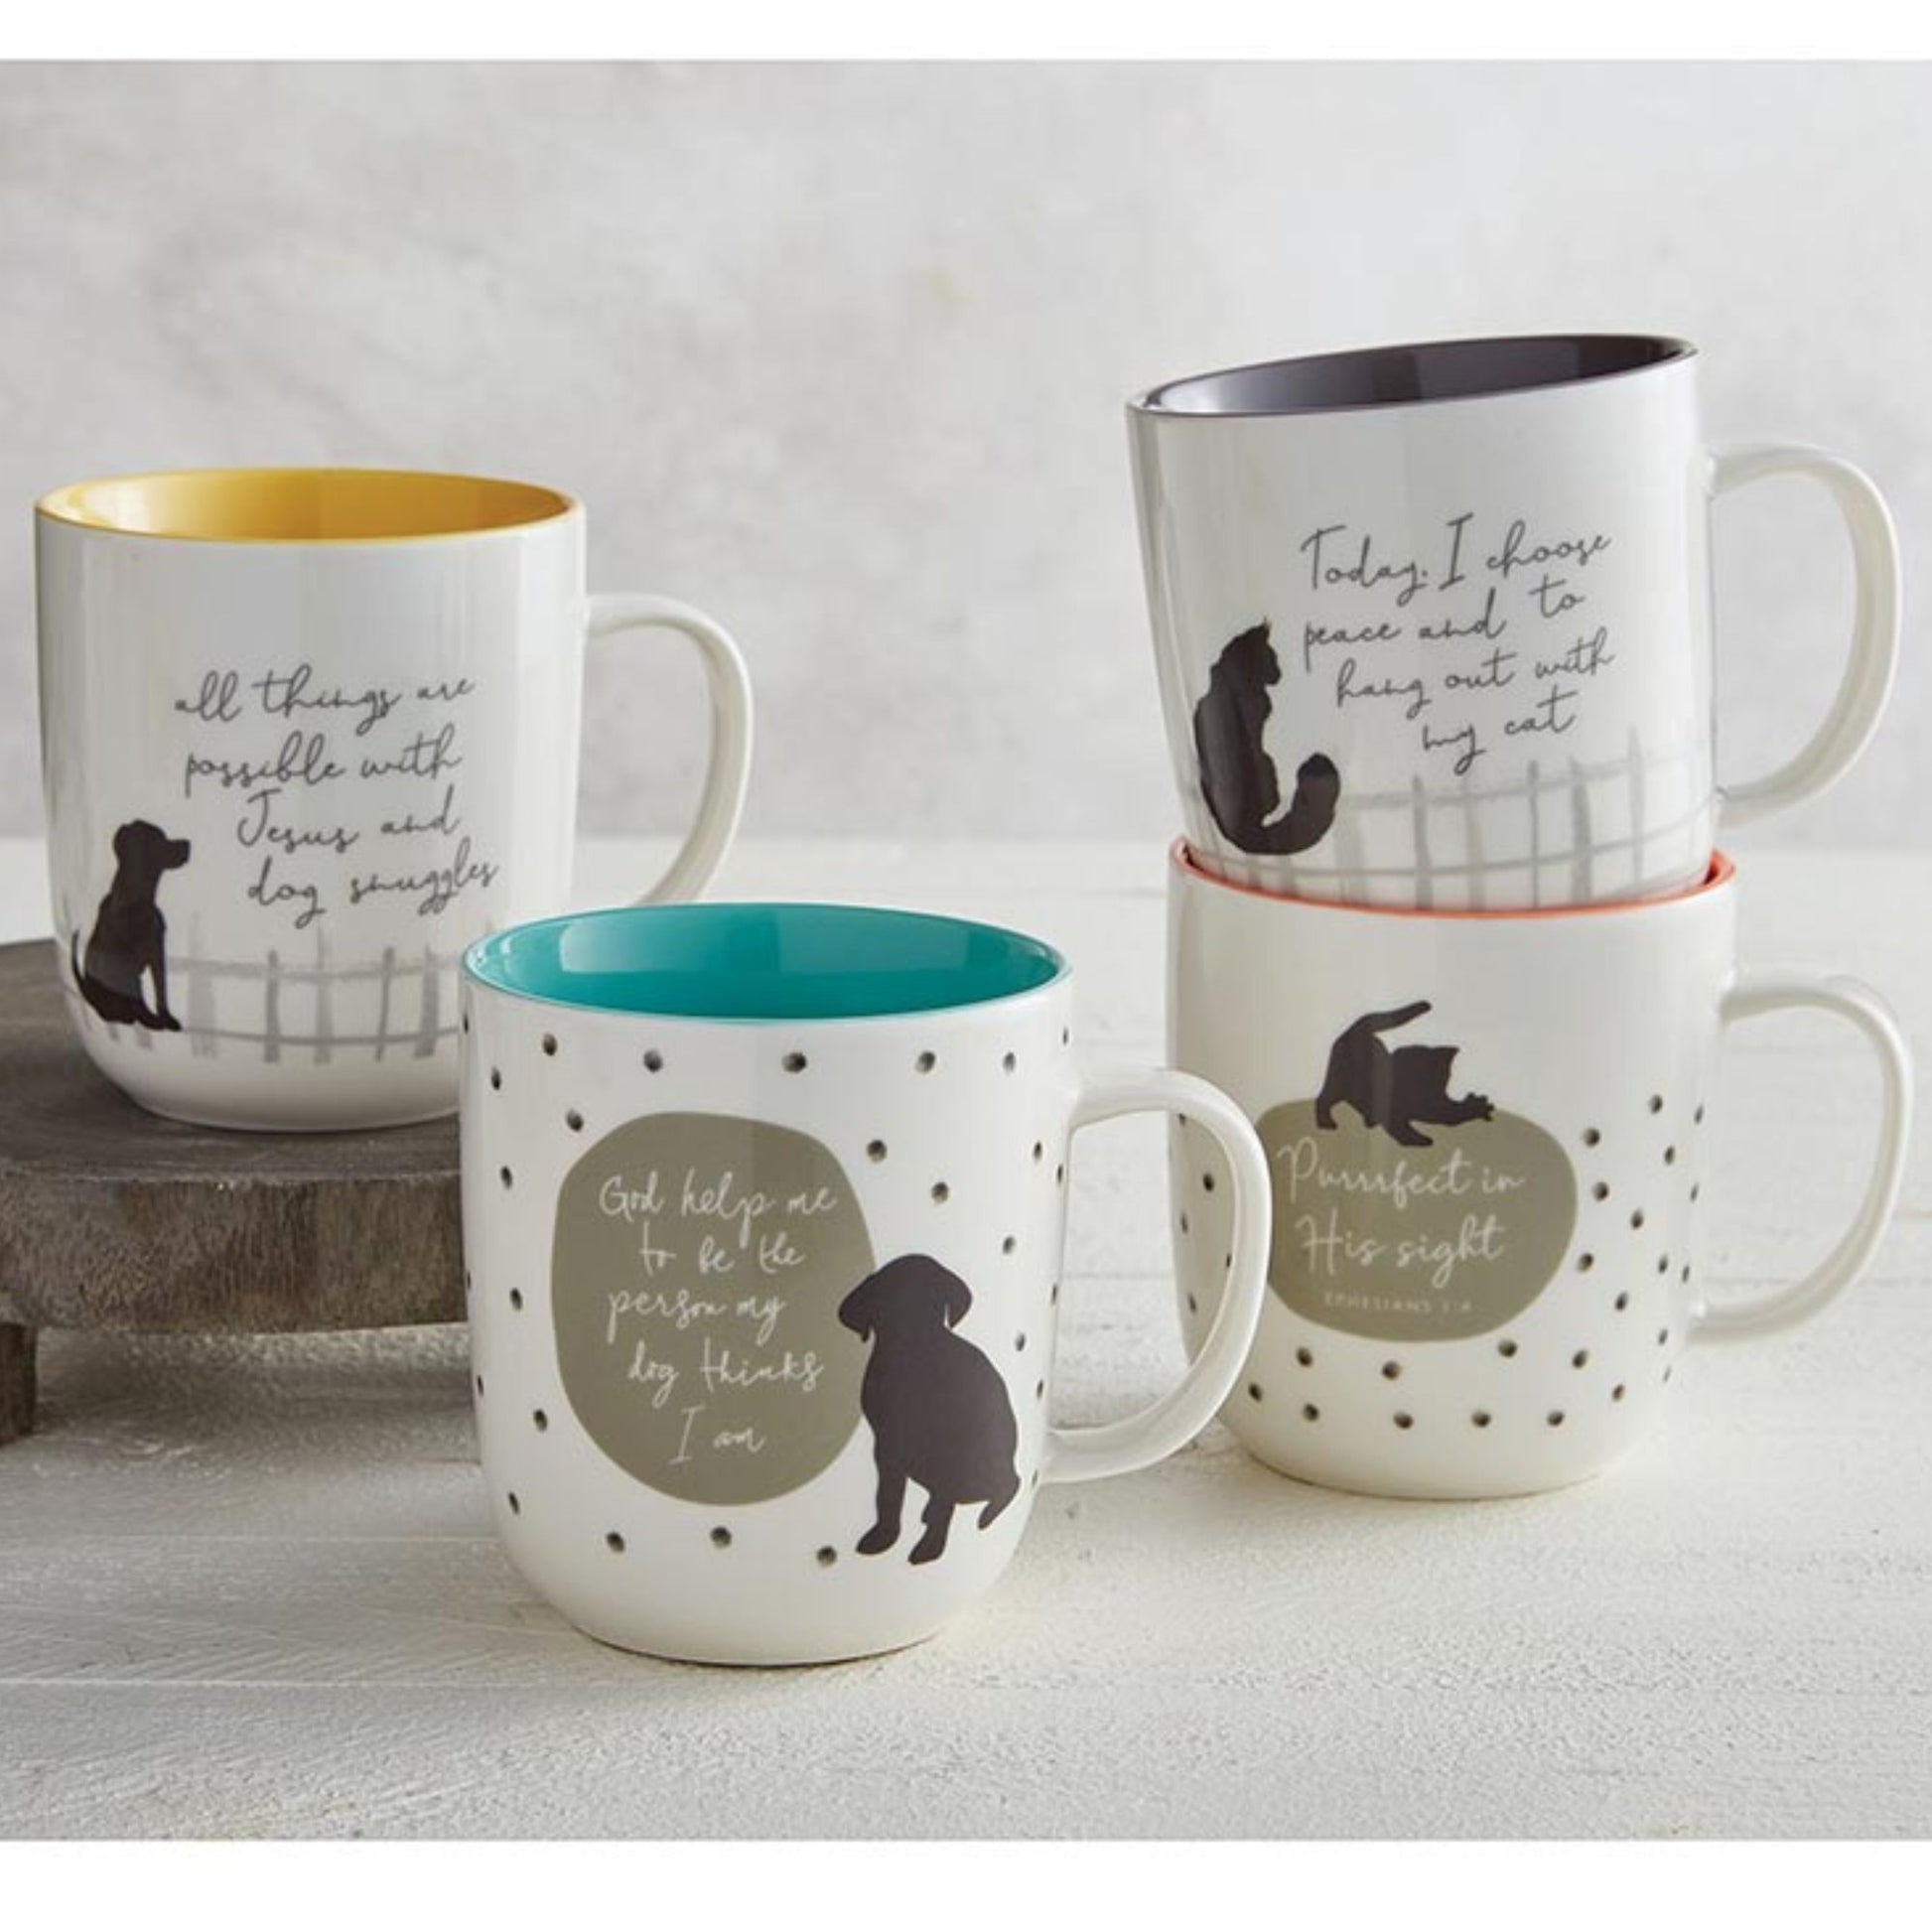 Pet Lover Coffee Mug - God help me to be the person my dog thinks I am - Shown with other Pet Lover Mugs | oak7west.com